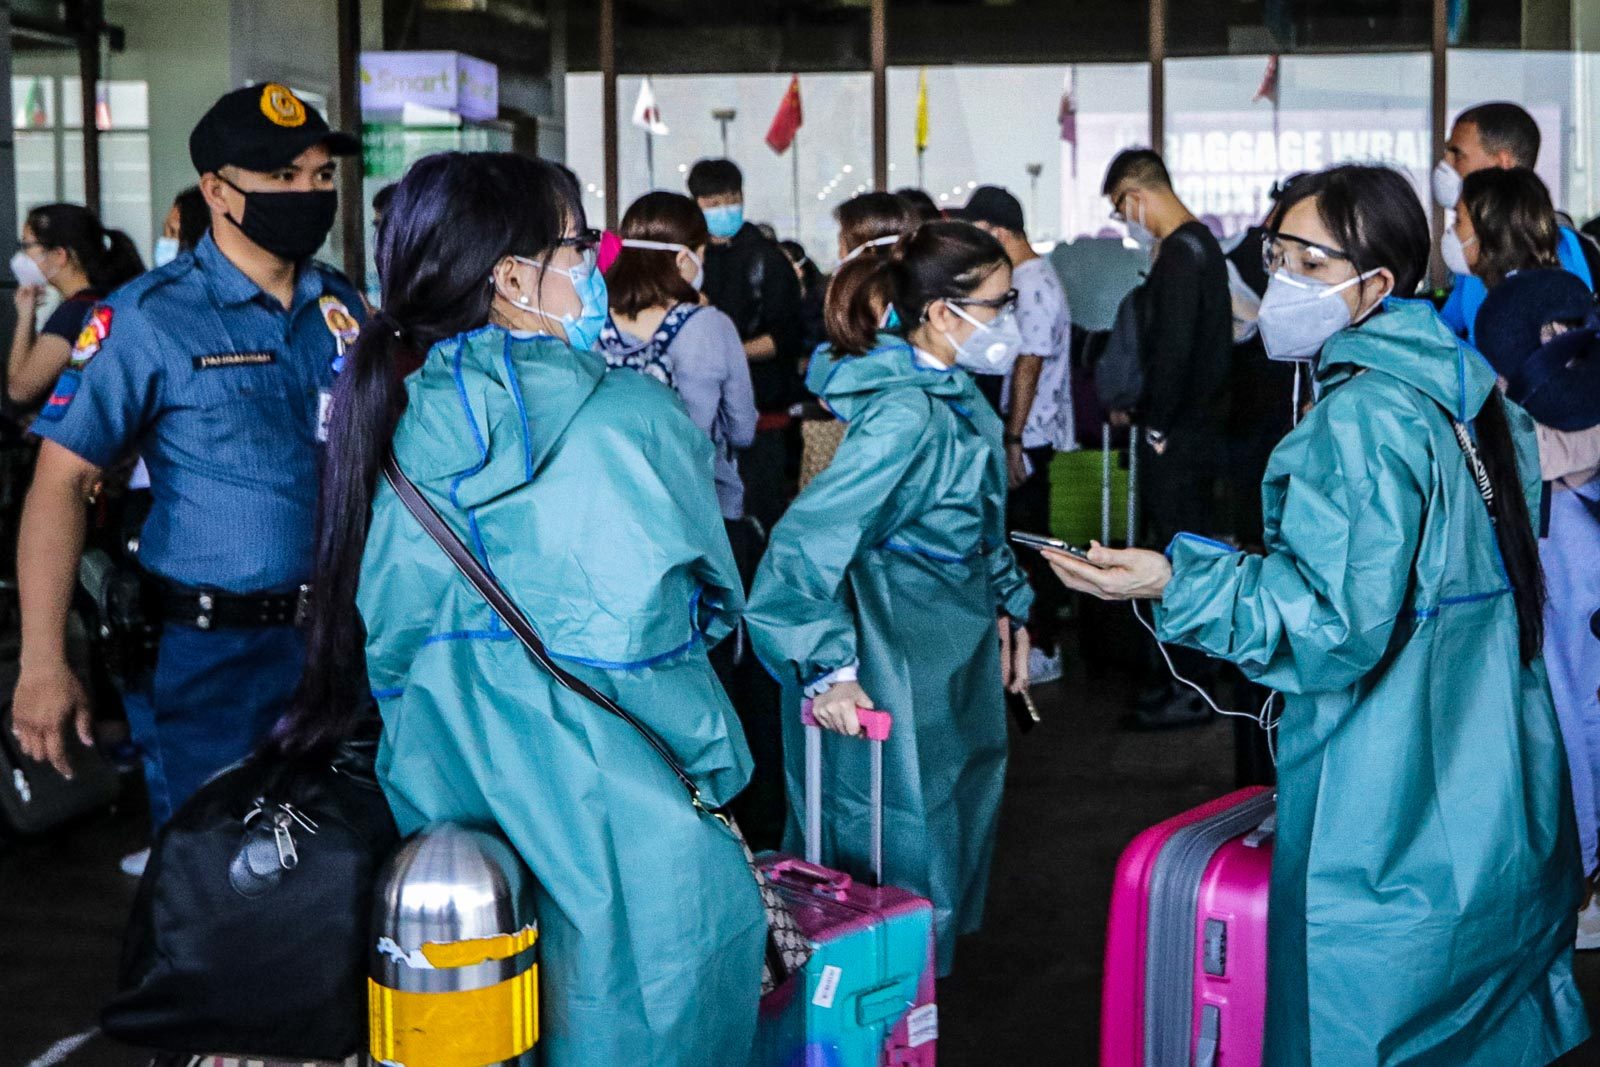 TRAVELING IN A PANDEMIC. Passengers crowd the NAIA Terminal 1 on March 19, 2020. File photo by KD Madrilejos/Rappler 